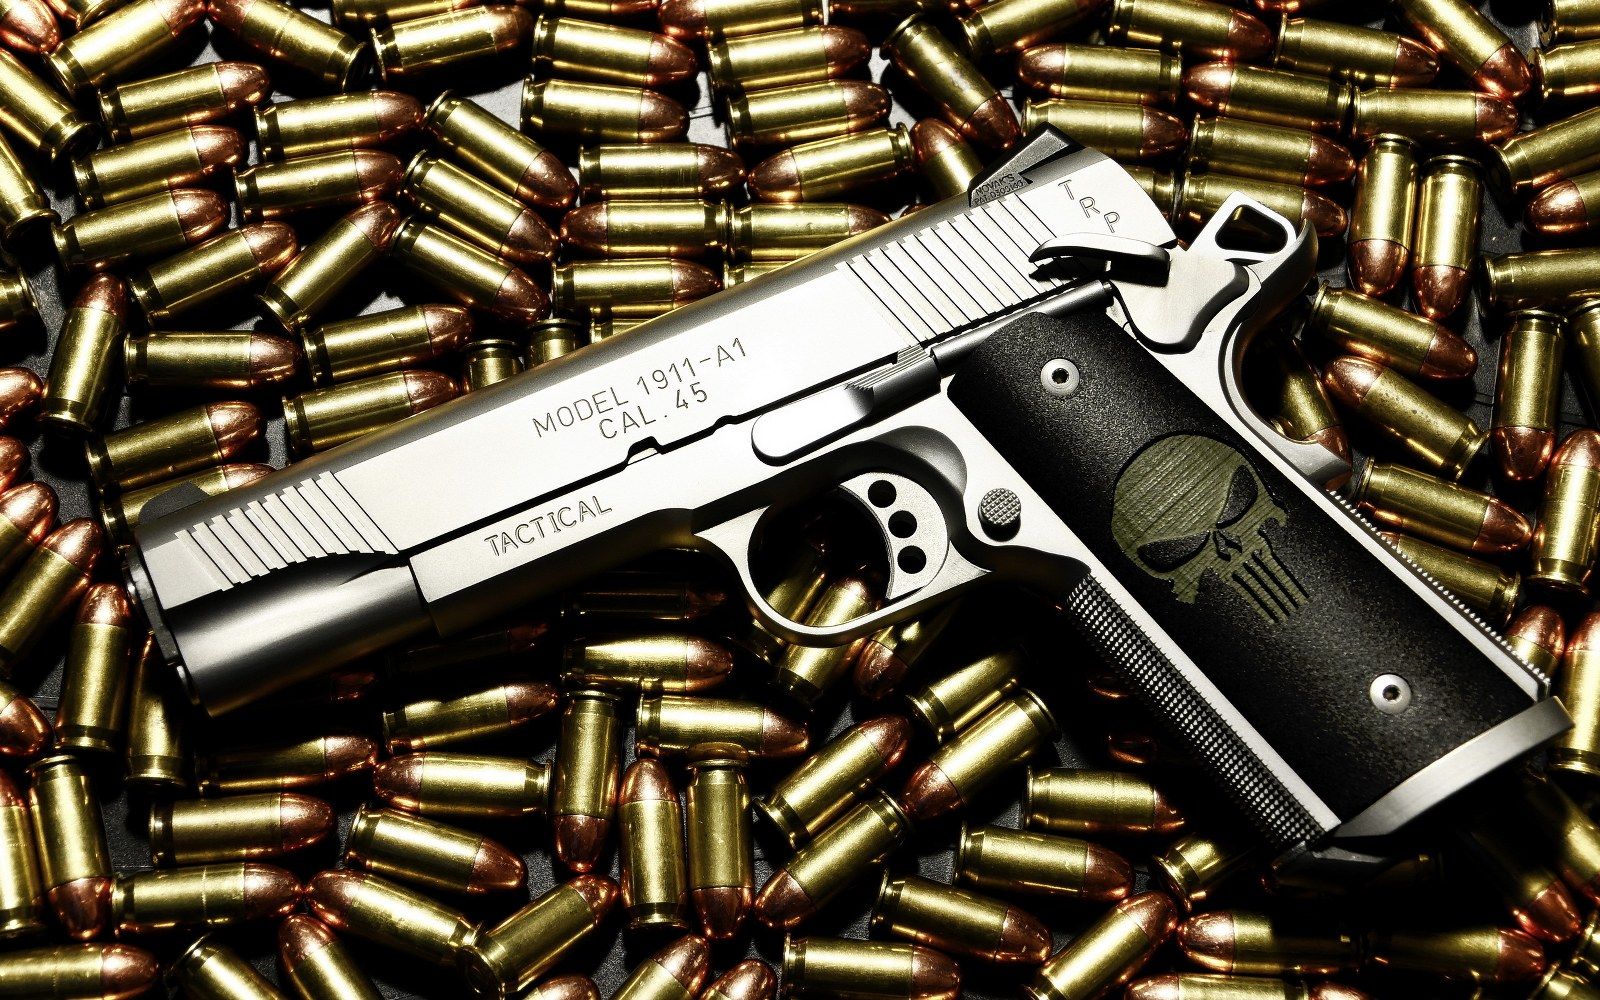 Police Gun Pictures | wallpapers55.com - Best Wallpapers for PCs ...